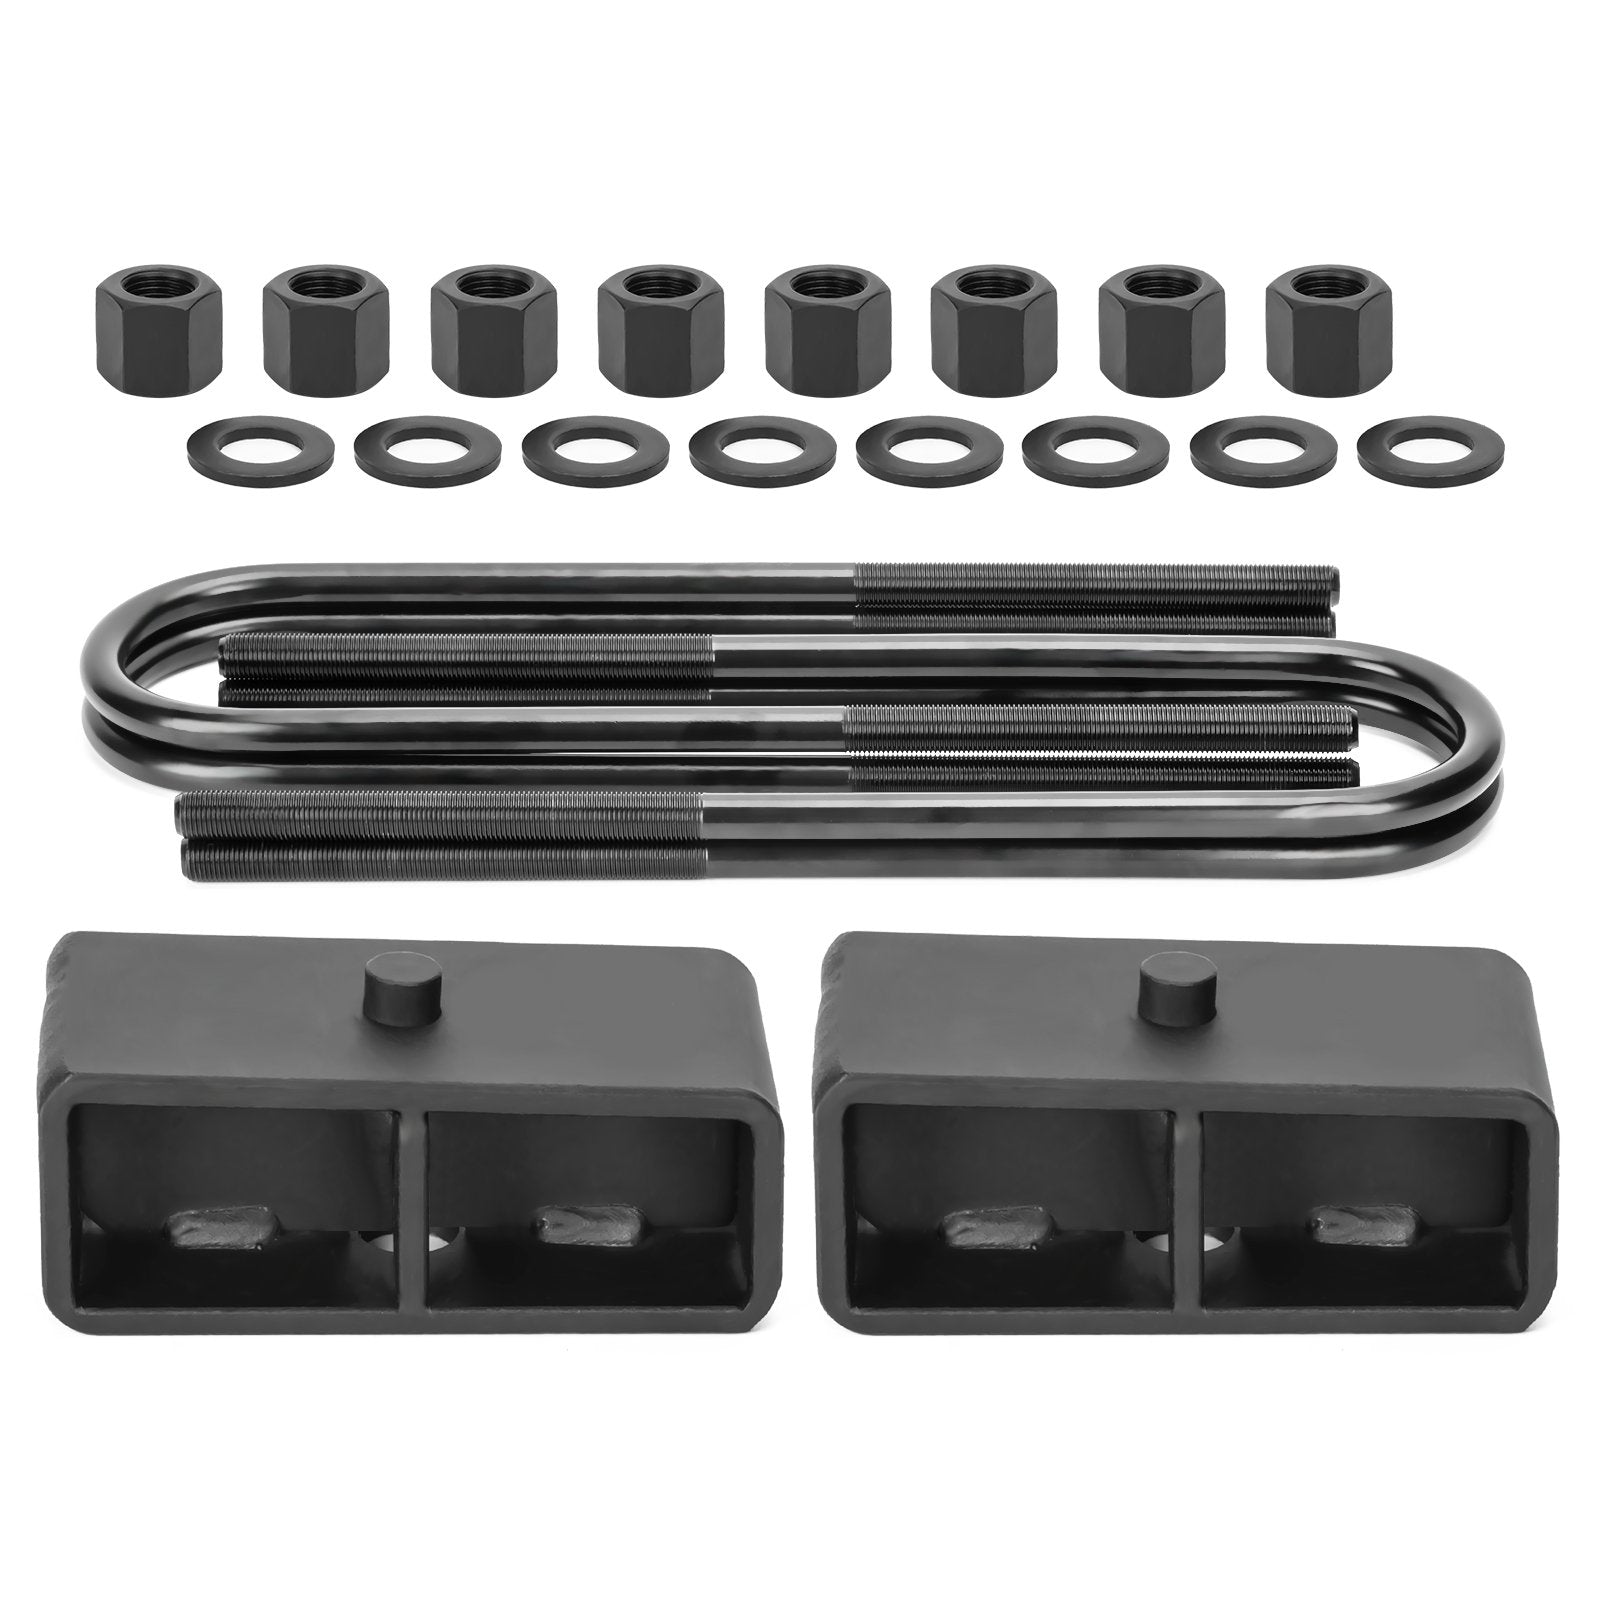 For 2006-2020 Ford F250/F350 2WD/4WD 2" Rear Lift Kits With Ubolts and Block, not fit a Dually/Overload Leaf Springs xccscss.